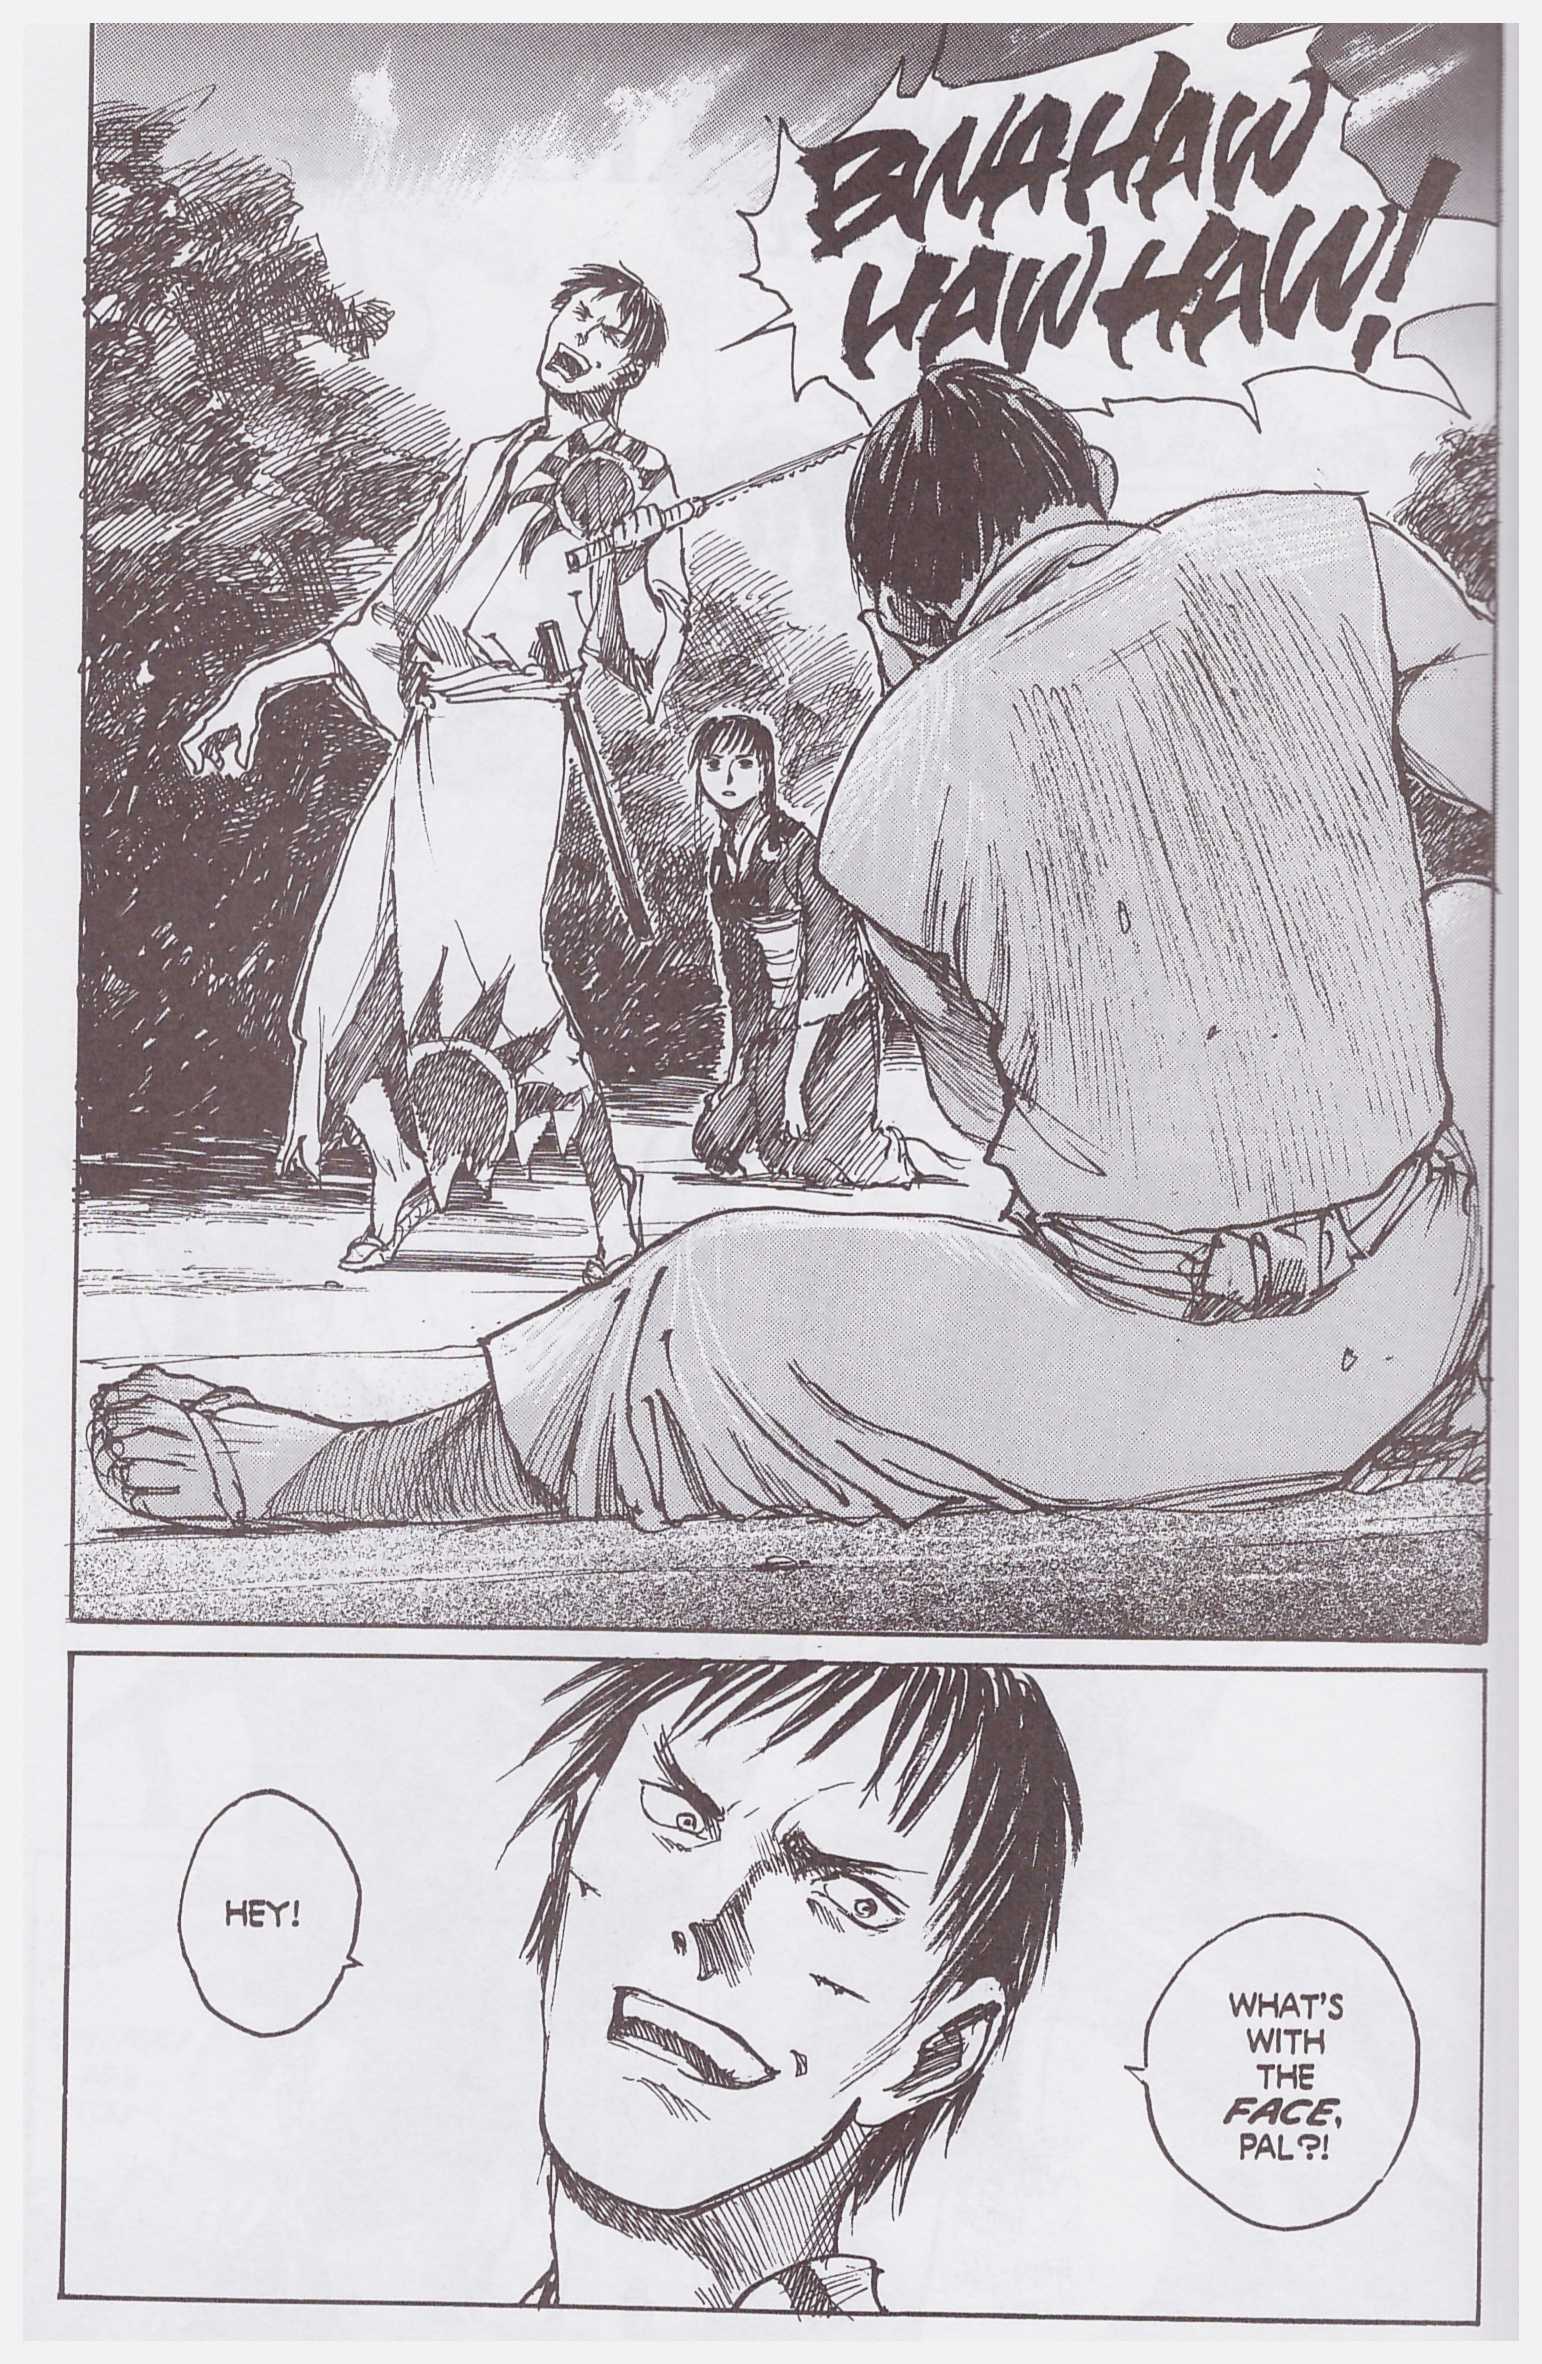 Blade of the Immortal 7 Heart of Darkness review